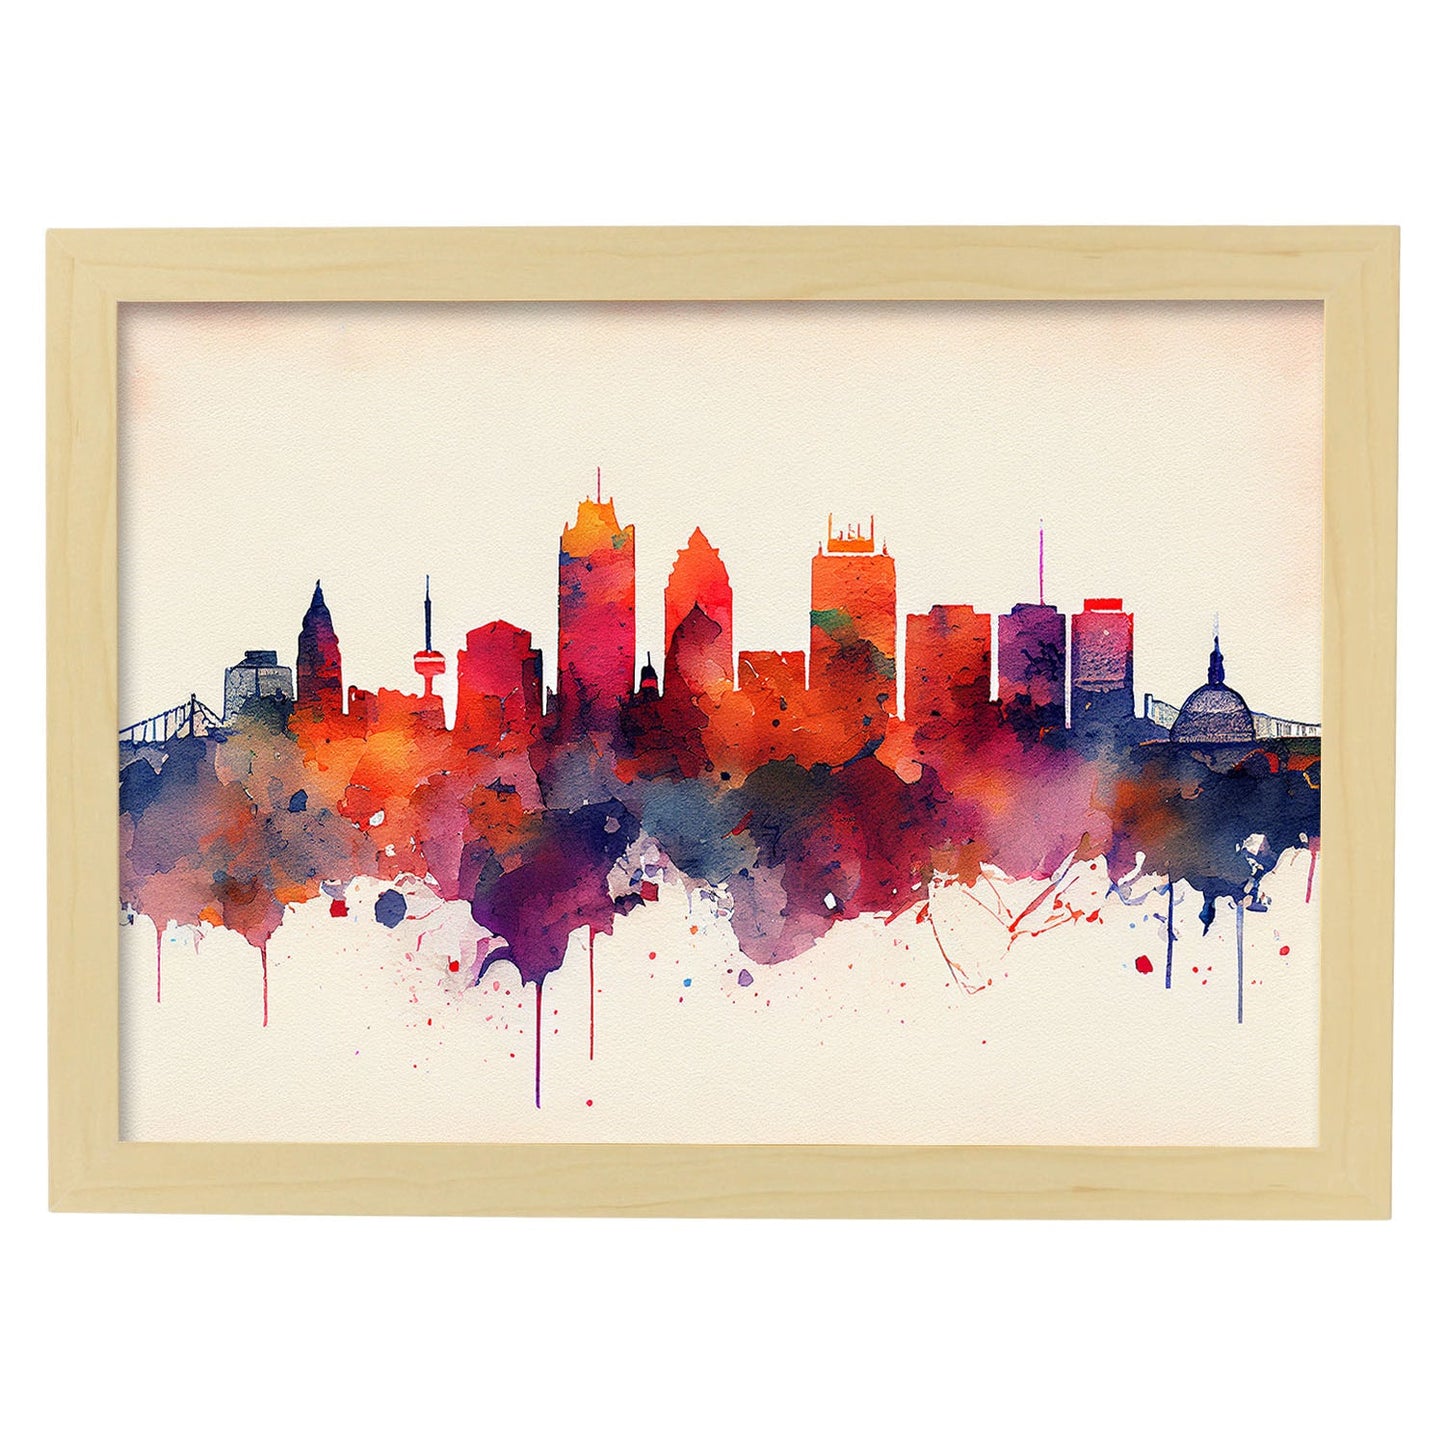 Nacnic watercolor of a skyline of the city of Boston_3. Aesthetic Wall Art Prints for Bedroom or Living Room Design.-Artwork-Nacnic-A4-Marco Madera Clara-Nacnic Estudio SL